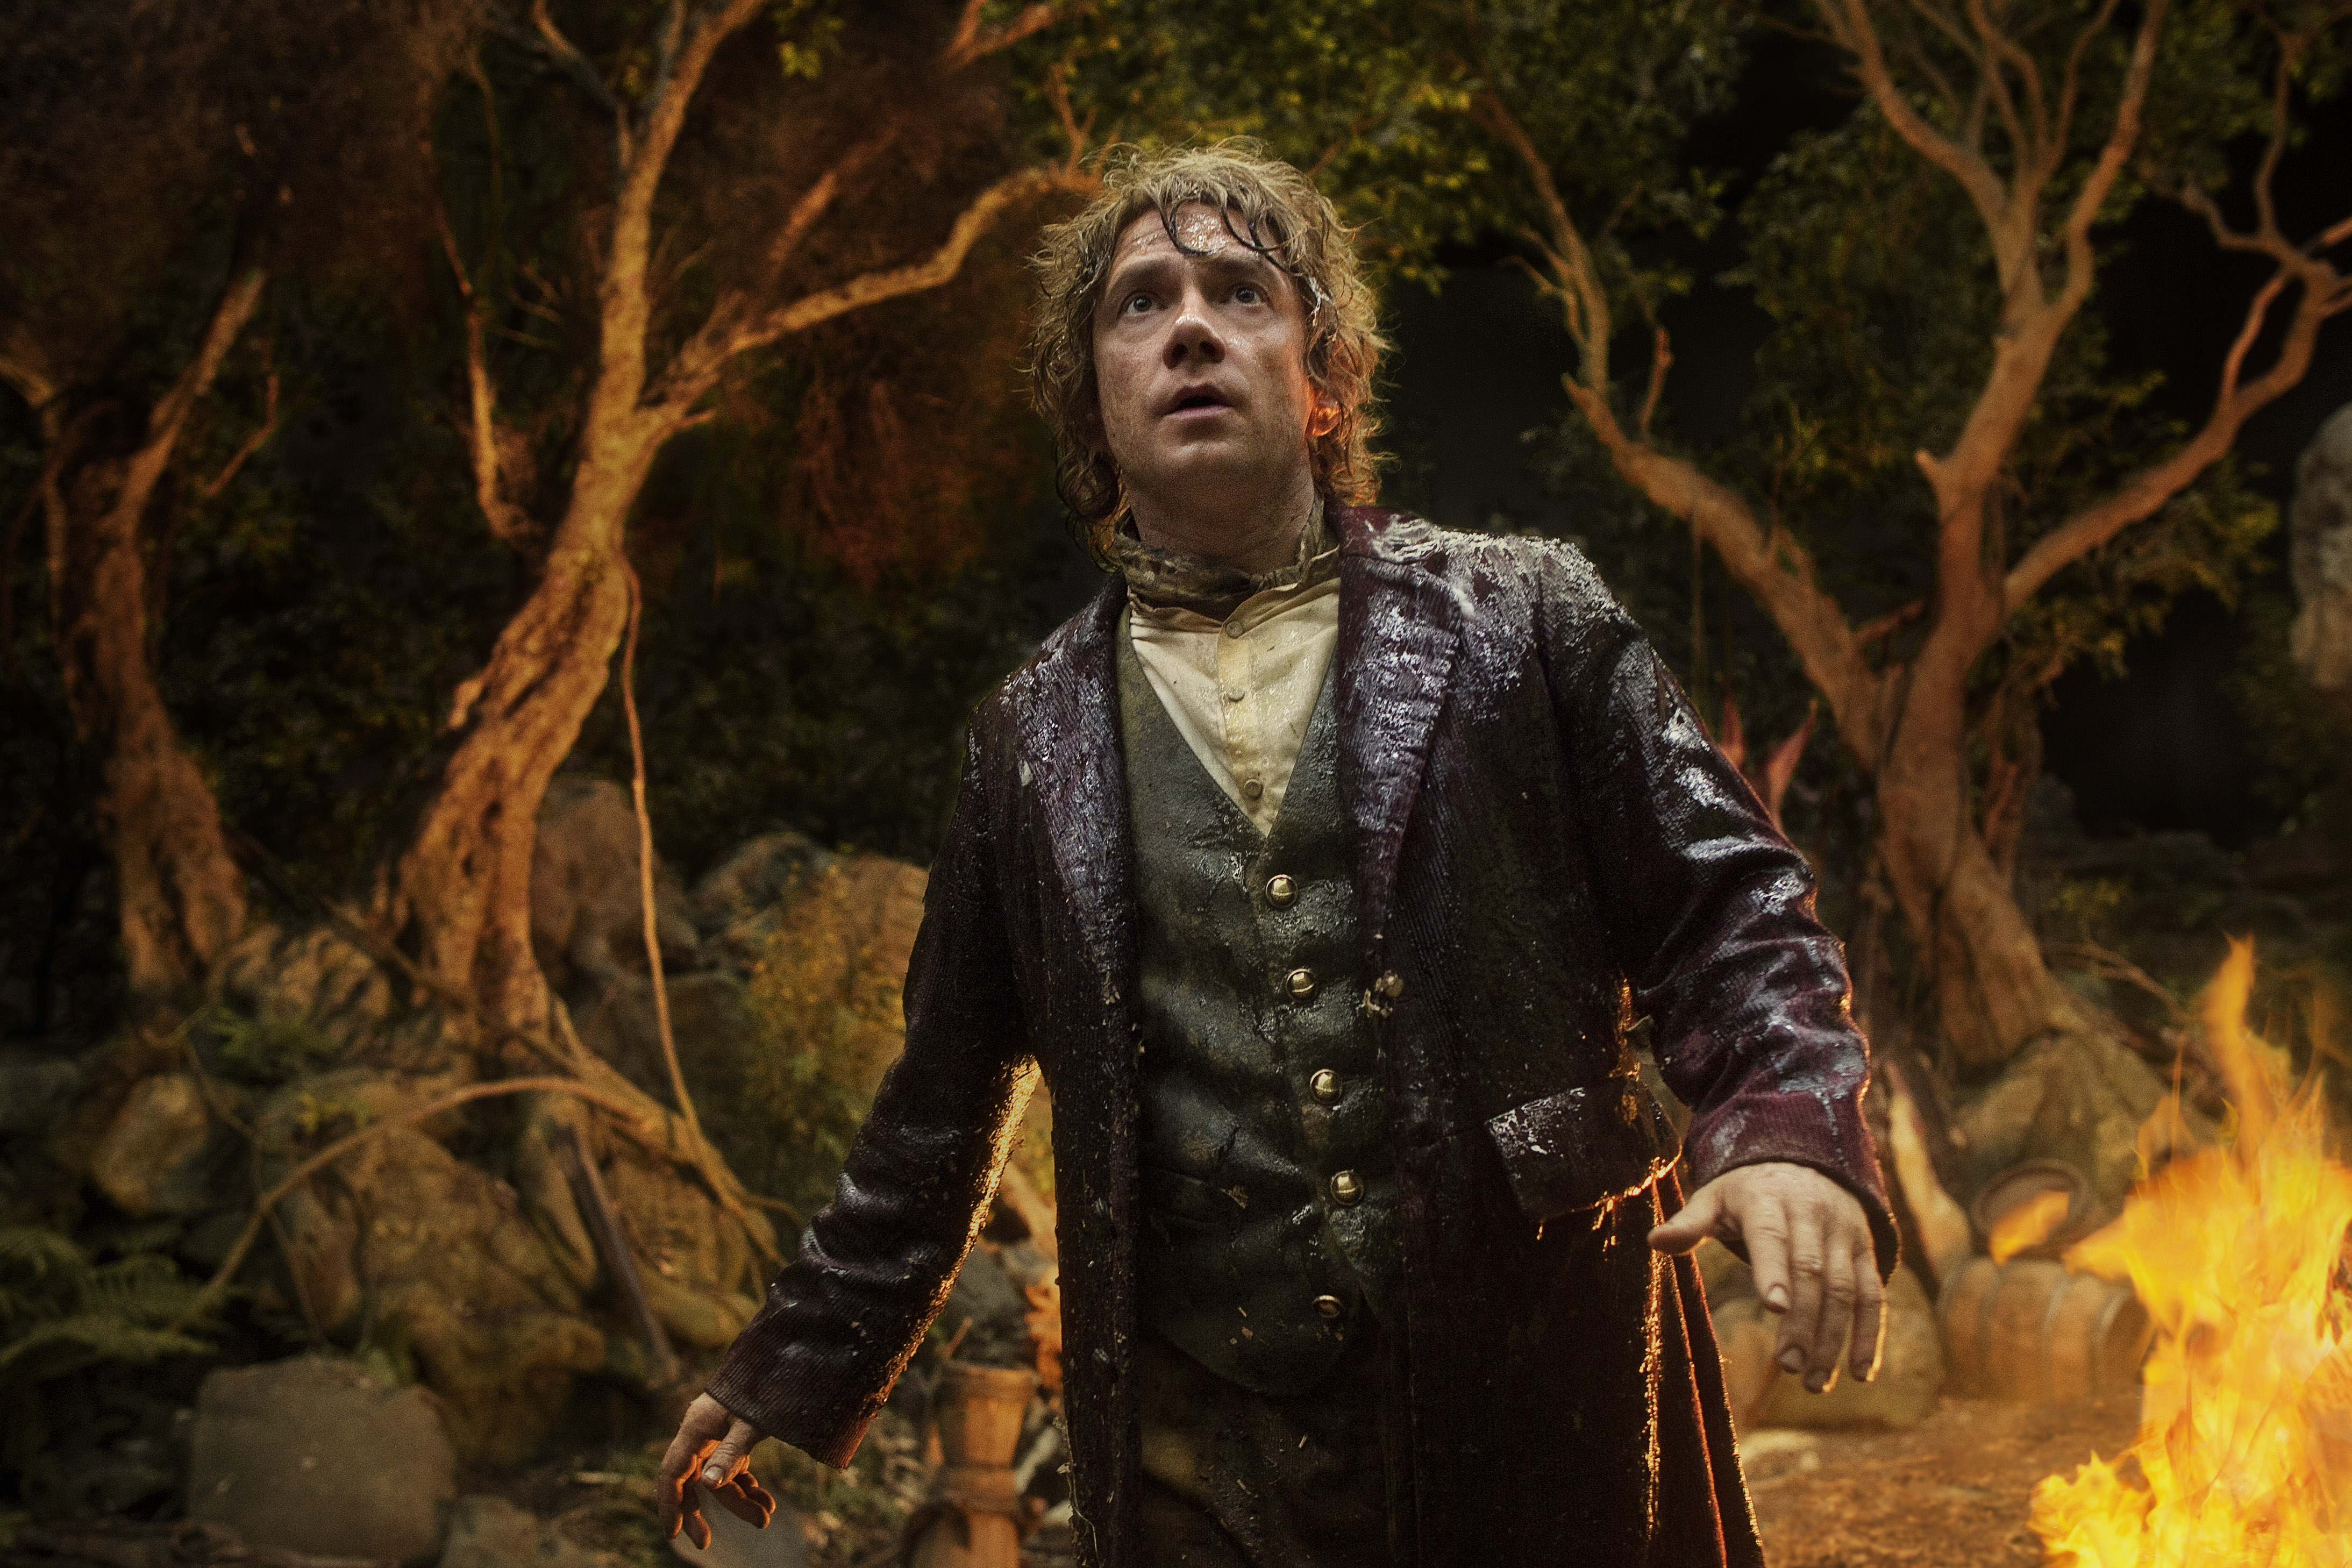 The Hobbit: An Unexpected Journey #9